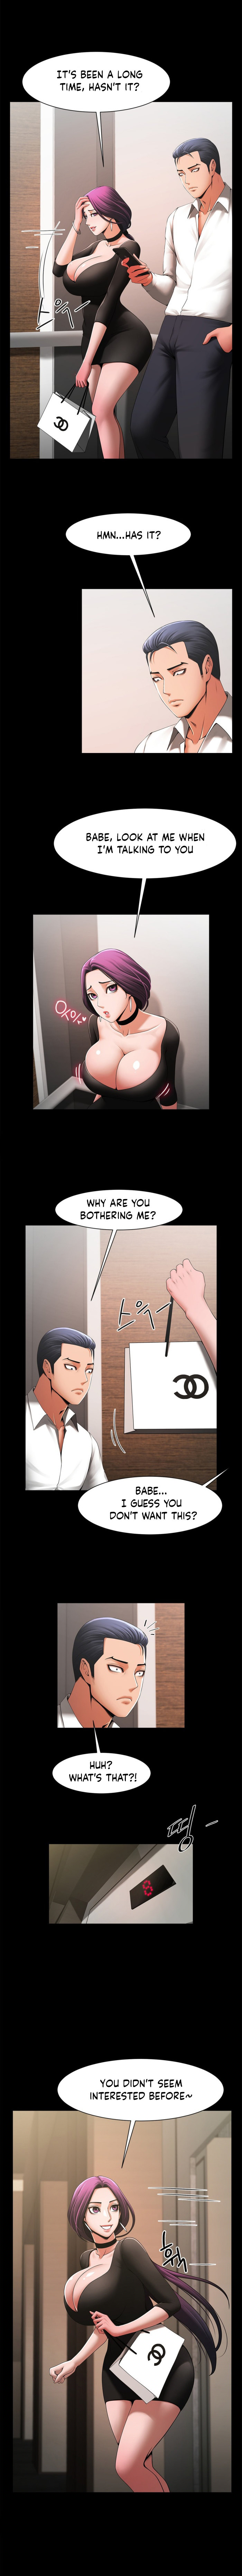 Under the Radar - Chapter 2 Page 3